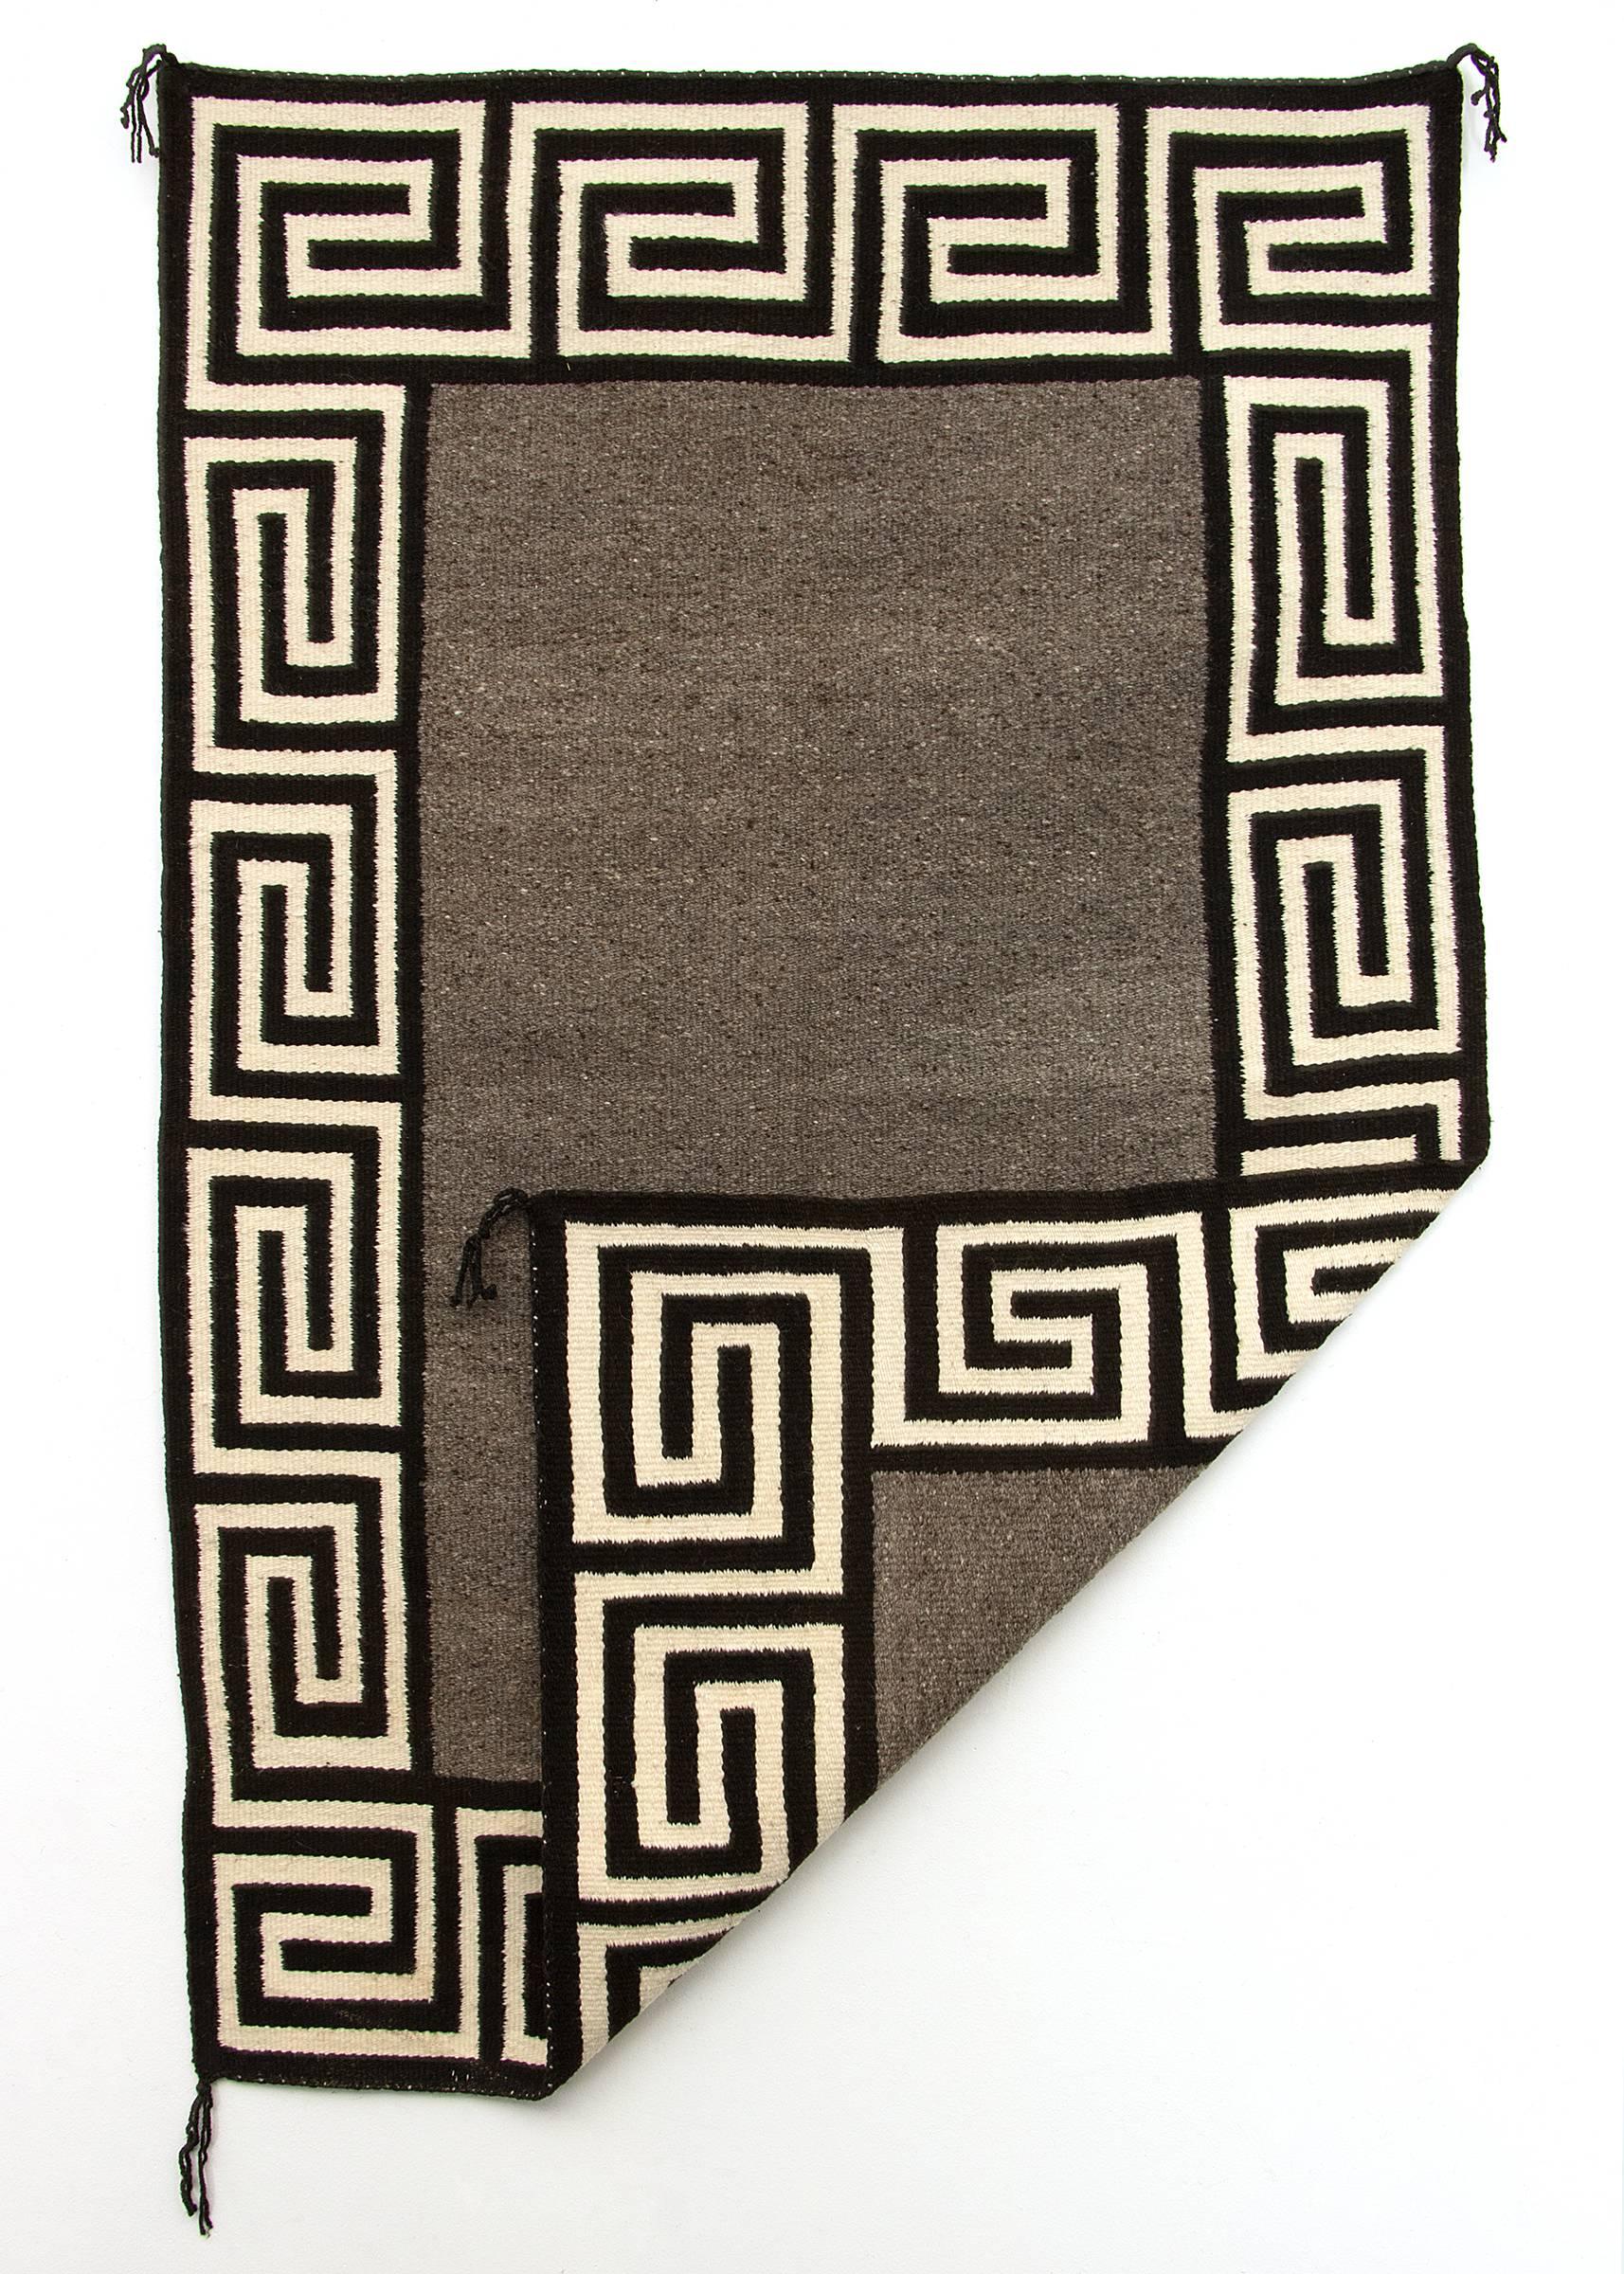 Native hand-spun wool in natural fleece colors of grey, ivory and black.

This piece is well suited for use on the floor as an area rug or as a wall hanging.